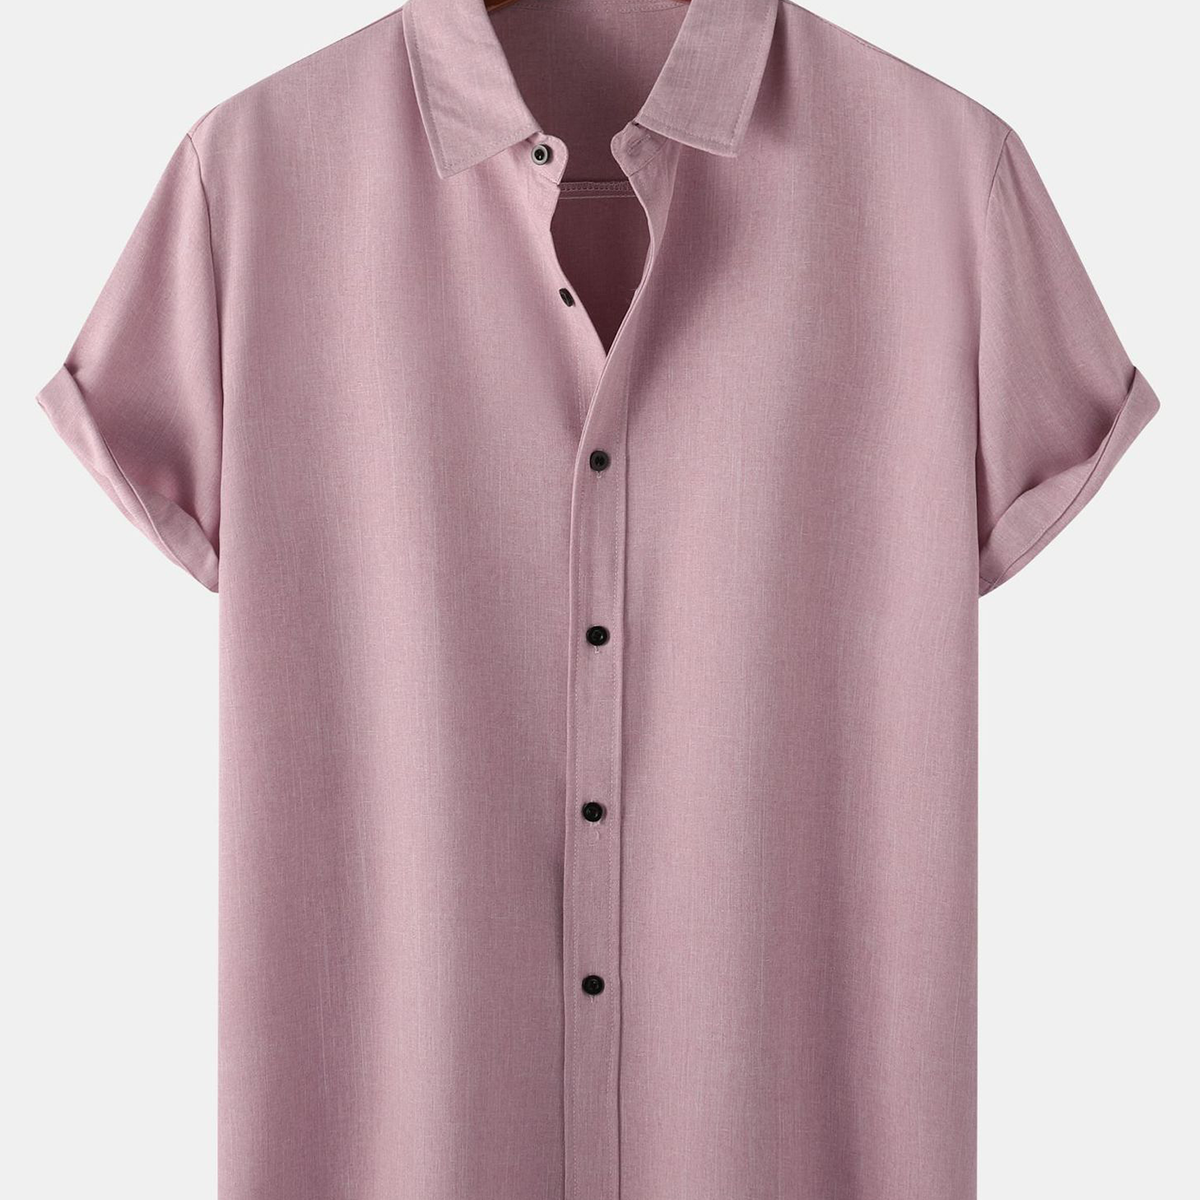 Men's Pink Breathable Solid Color Cotton Button Up Casual Short Sleeve Shirt